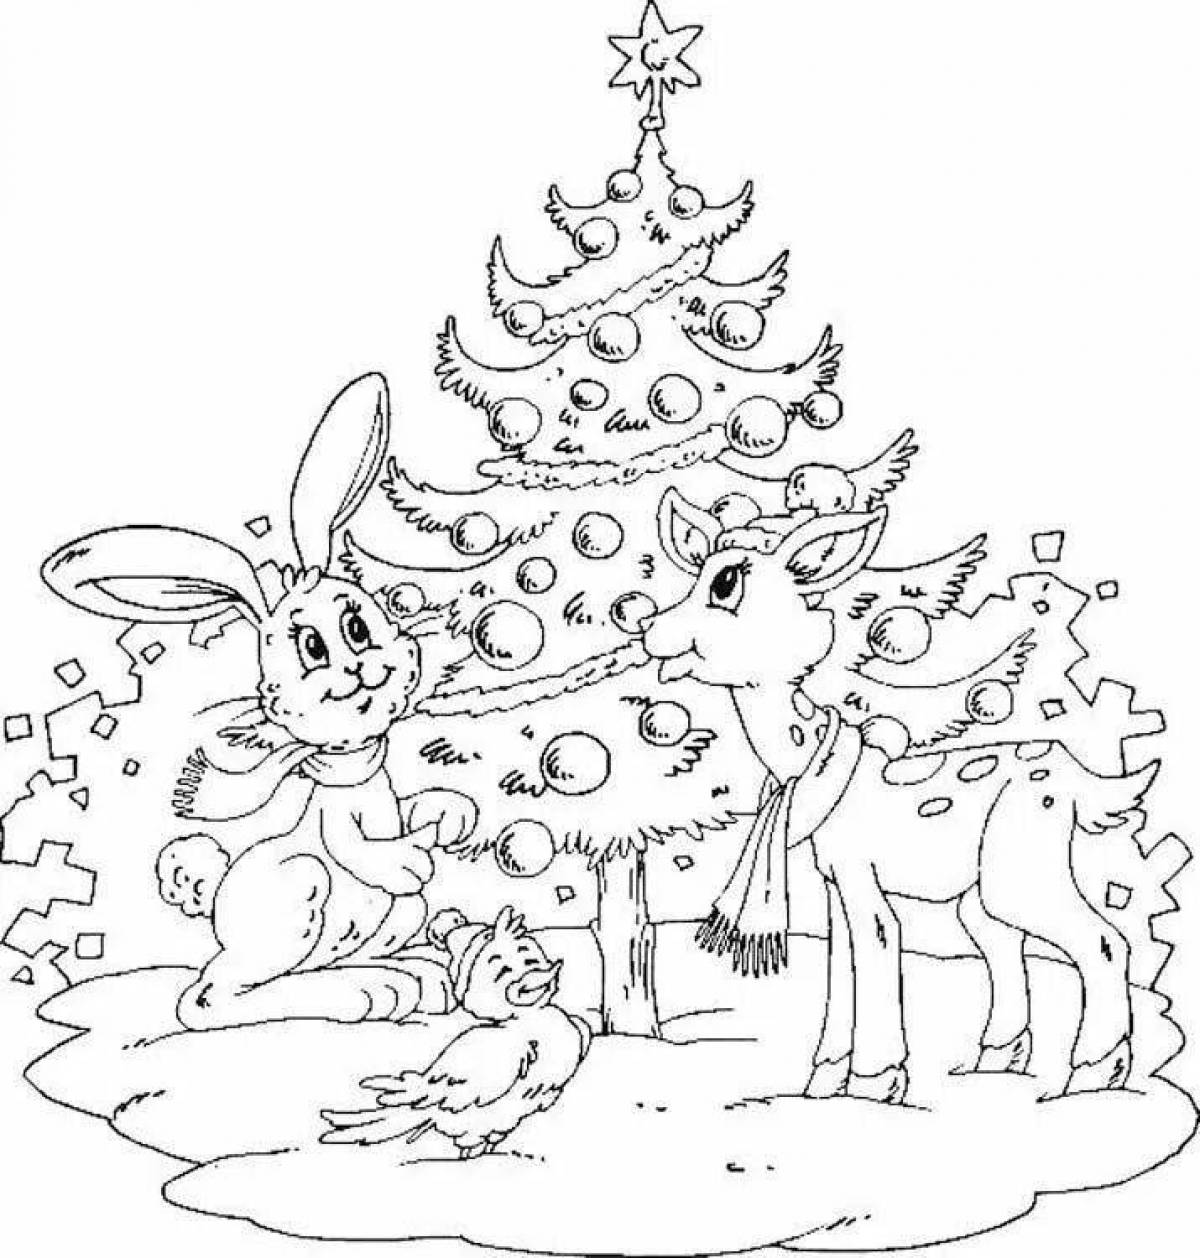 Gorgeous Christmas tree and rabbit coloring book